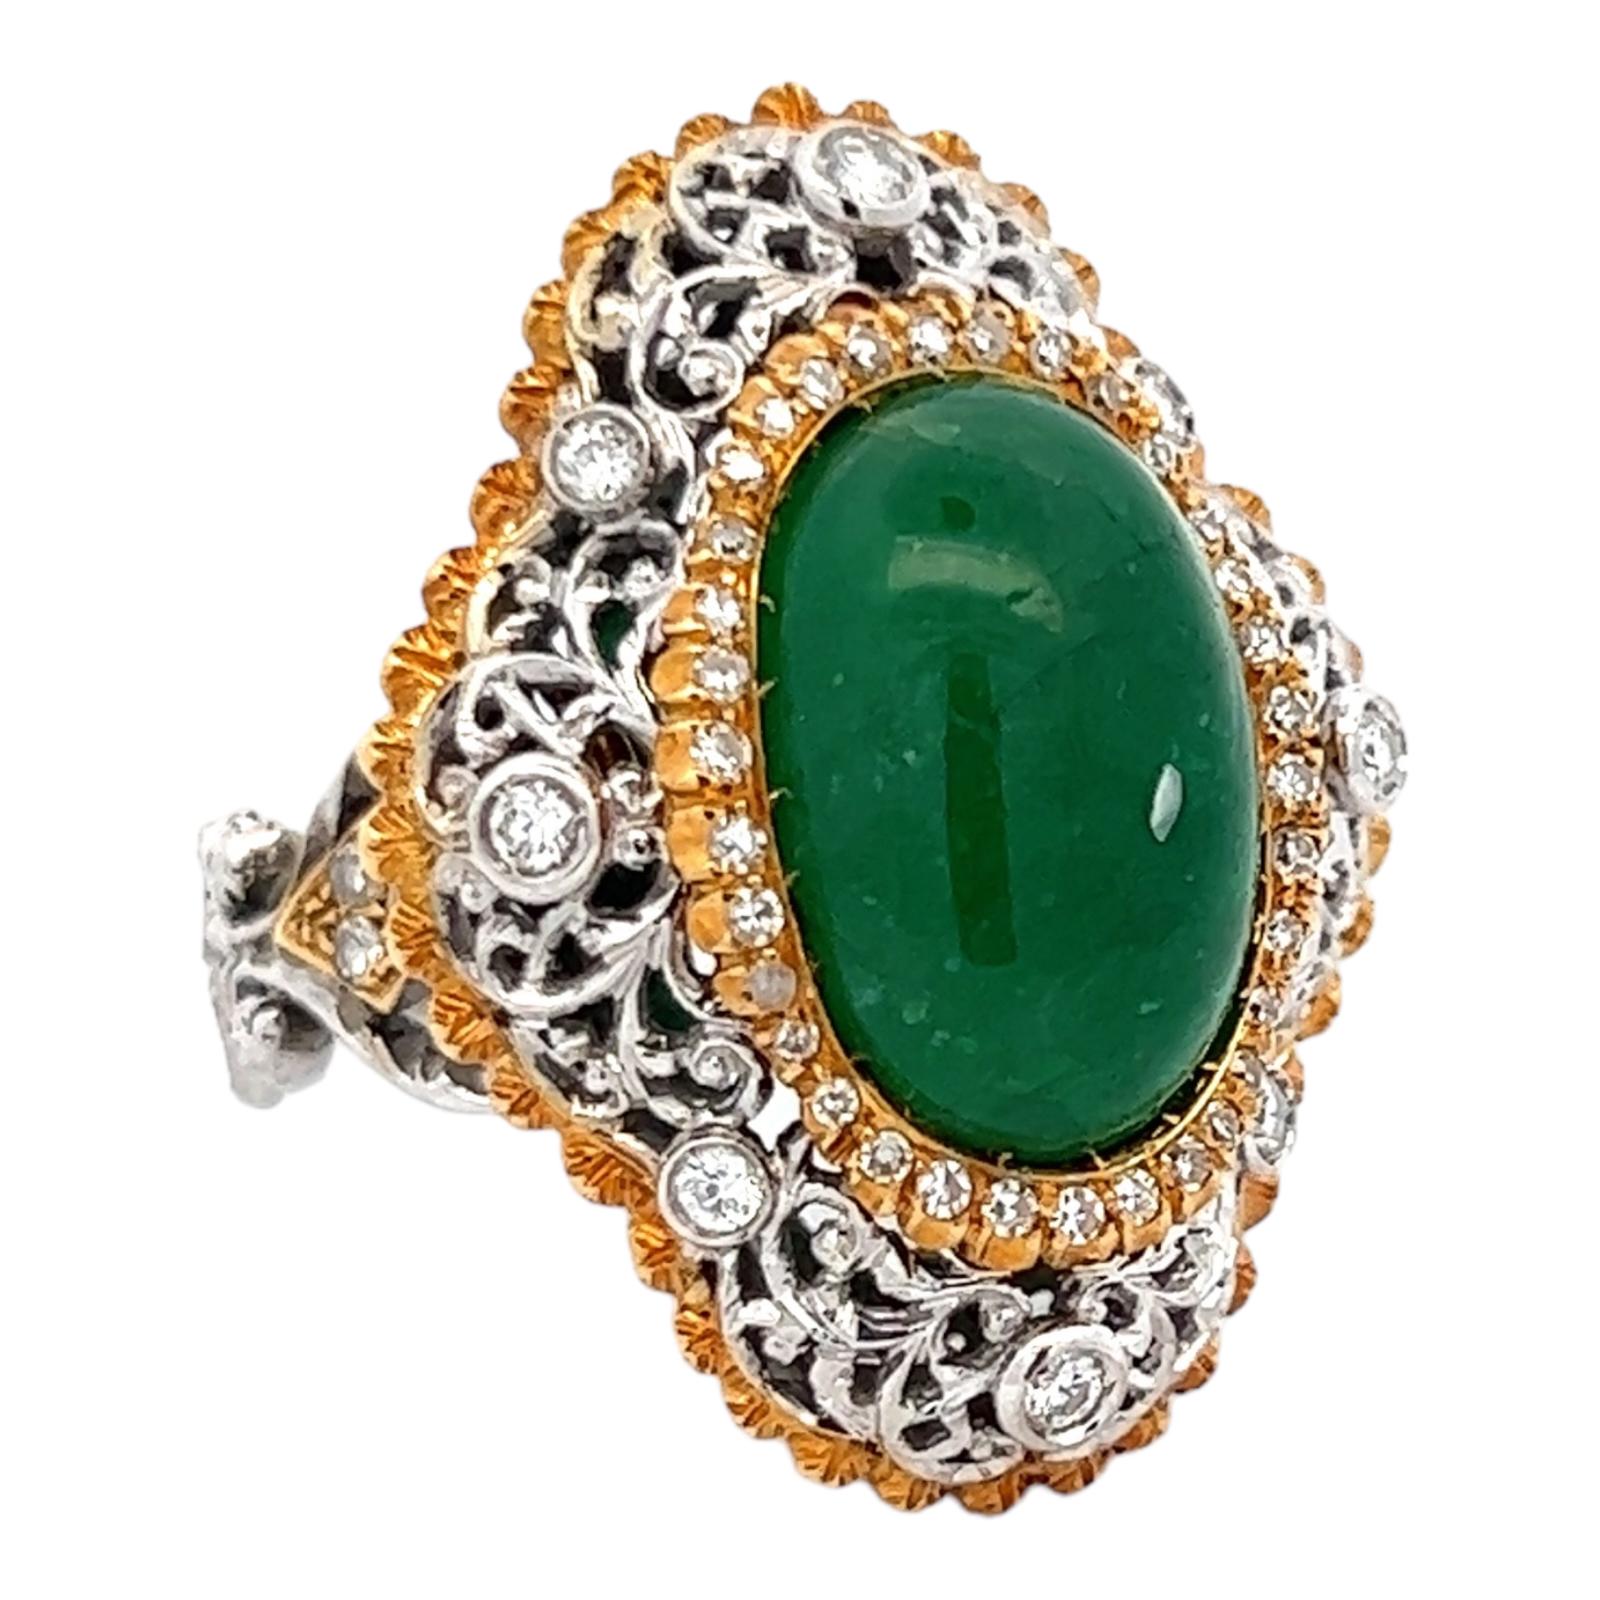 8.0 Carat Natural Emerald Diamond 18K Yellow & White Gold Cocktail Ring  In Excellent Condition For Sale In Boca Raton, FL